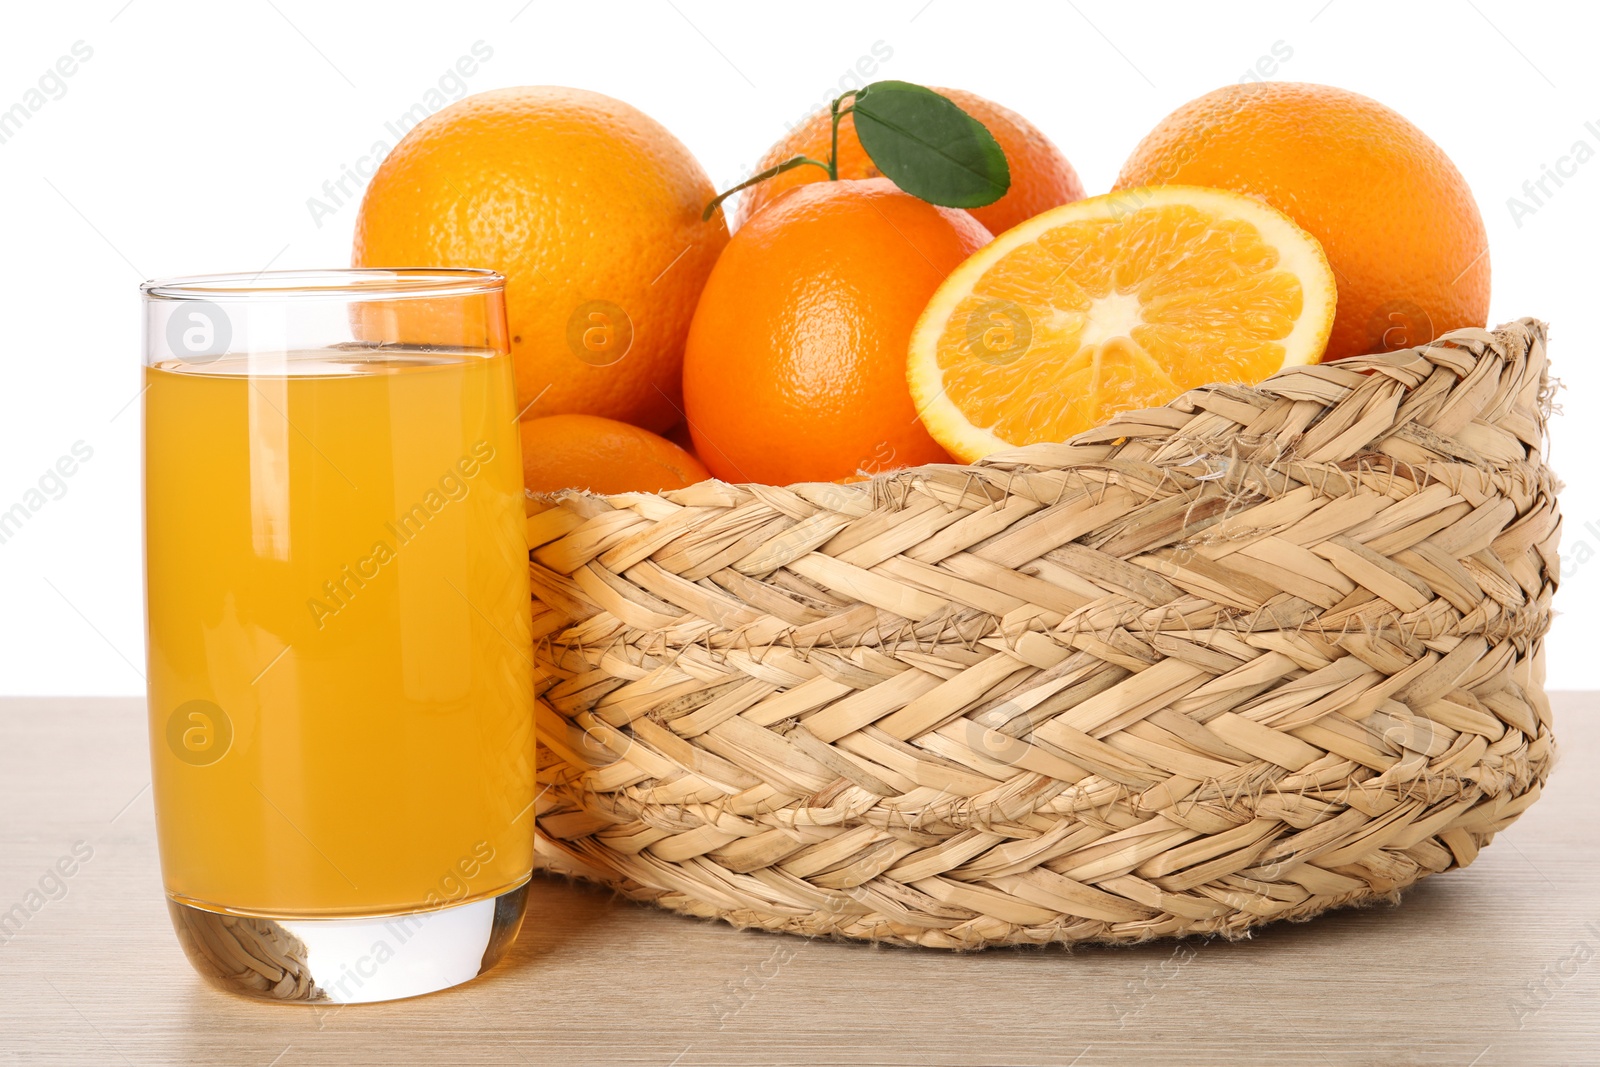 Photo of Fresh oranges in wicker basket and glass of juice on light wooden table against white background